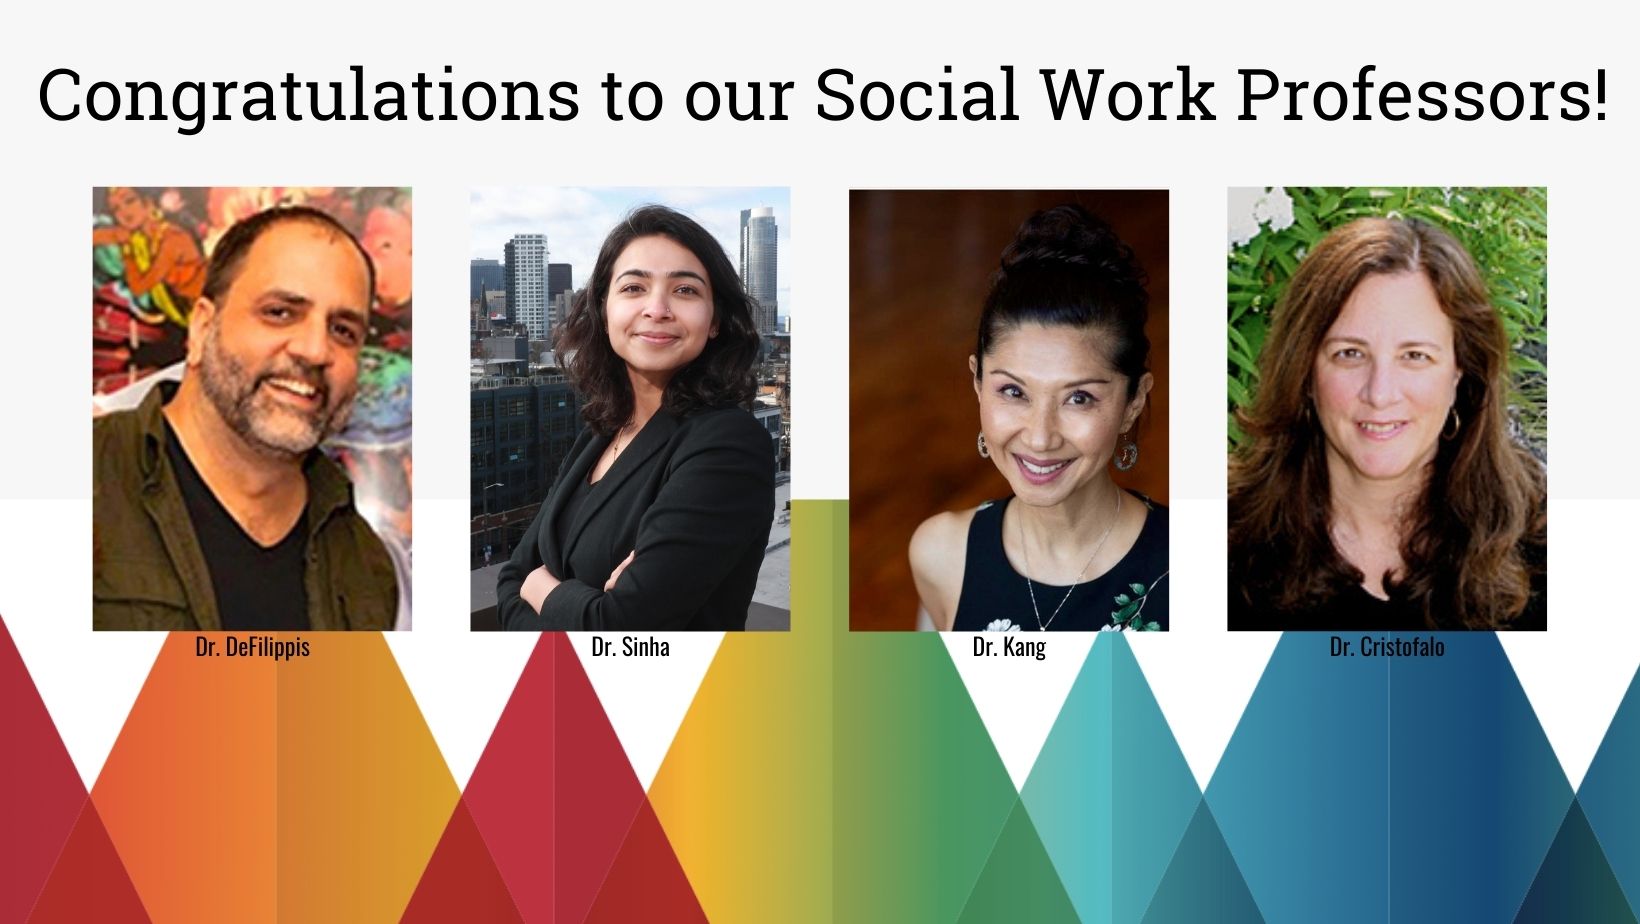 Congratulations to our Social Work Professors! Dr. DeFilippis, Dr. Sinha, Dr. Kang, Dr. Cristofalo